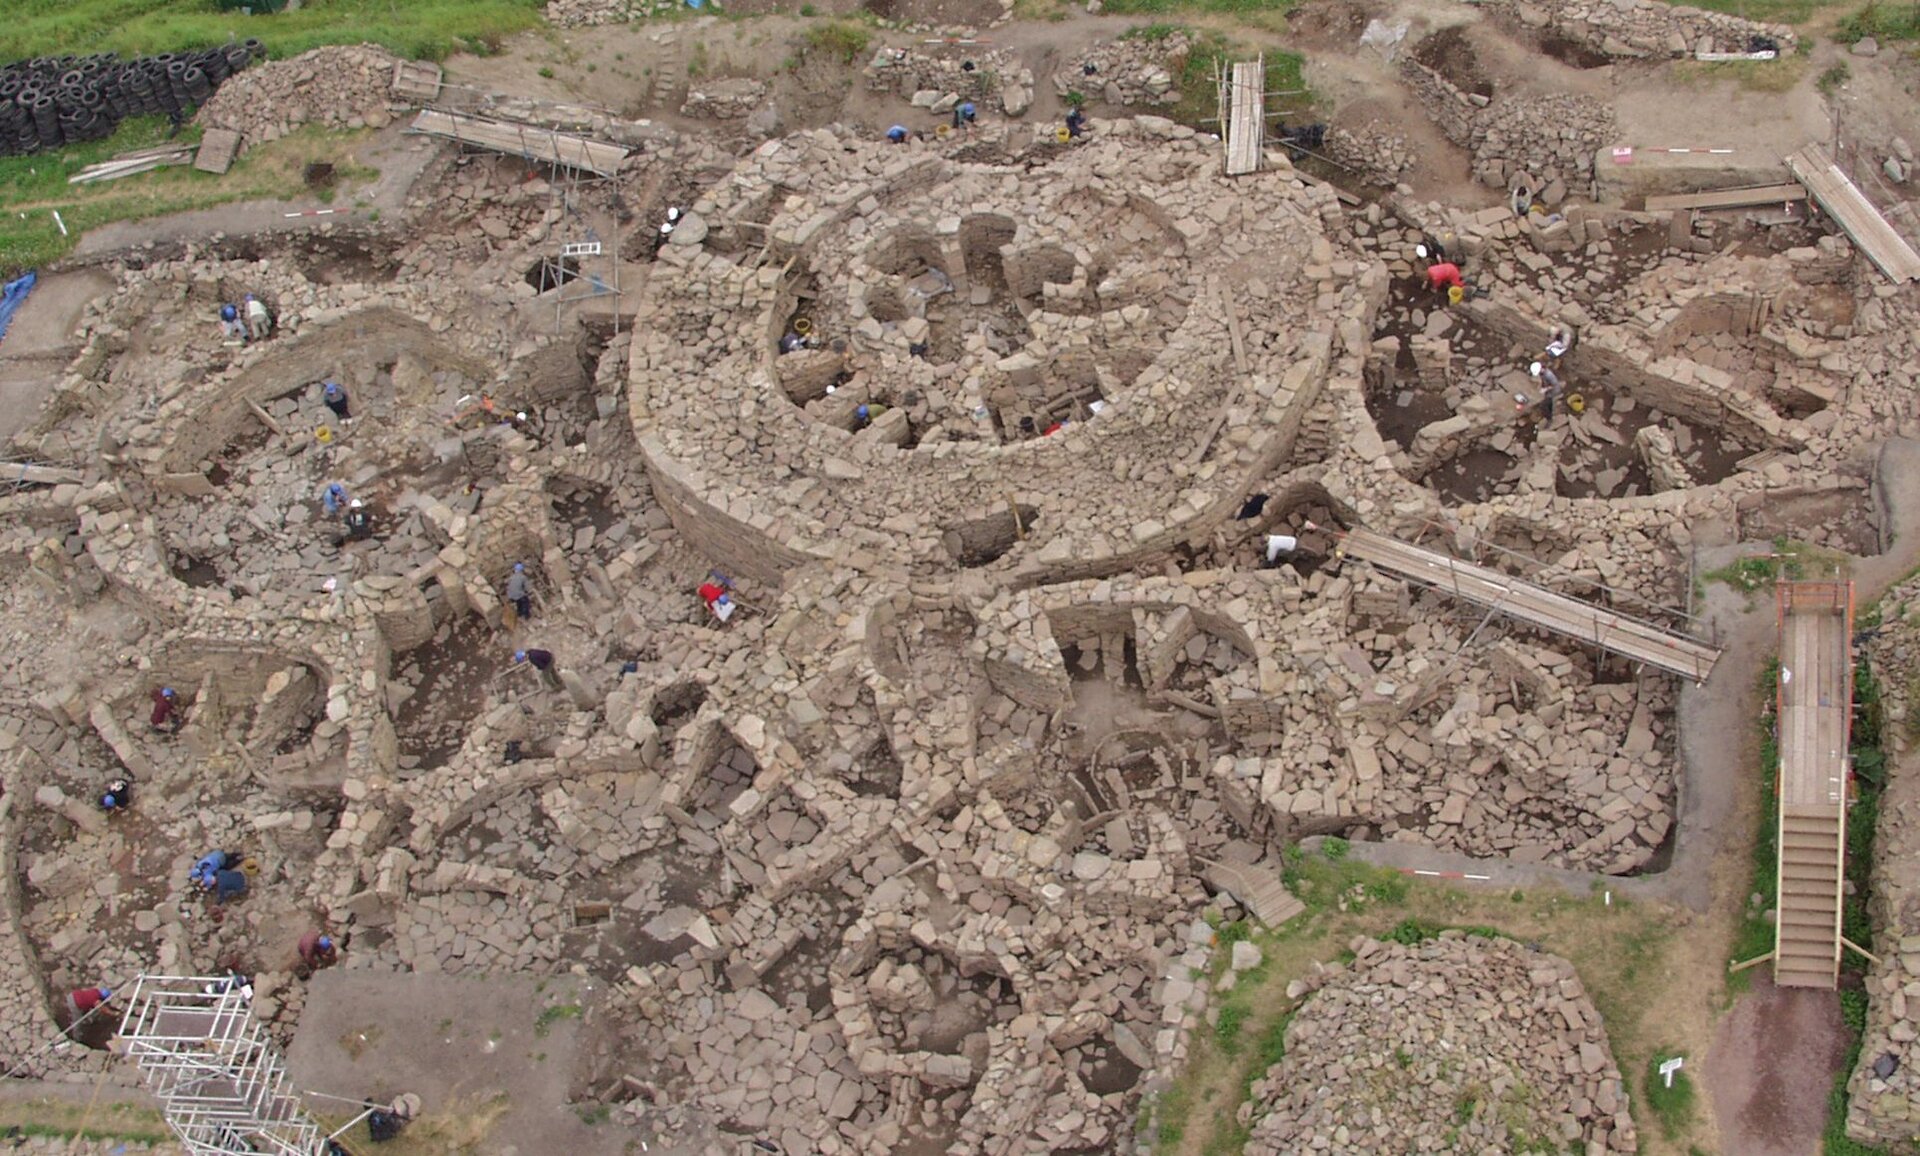 The excavations at Scatness in Shetland's South Mainland uncovered a Iron Age village well beyond archaeologists' expectations.